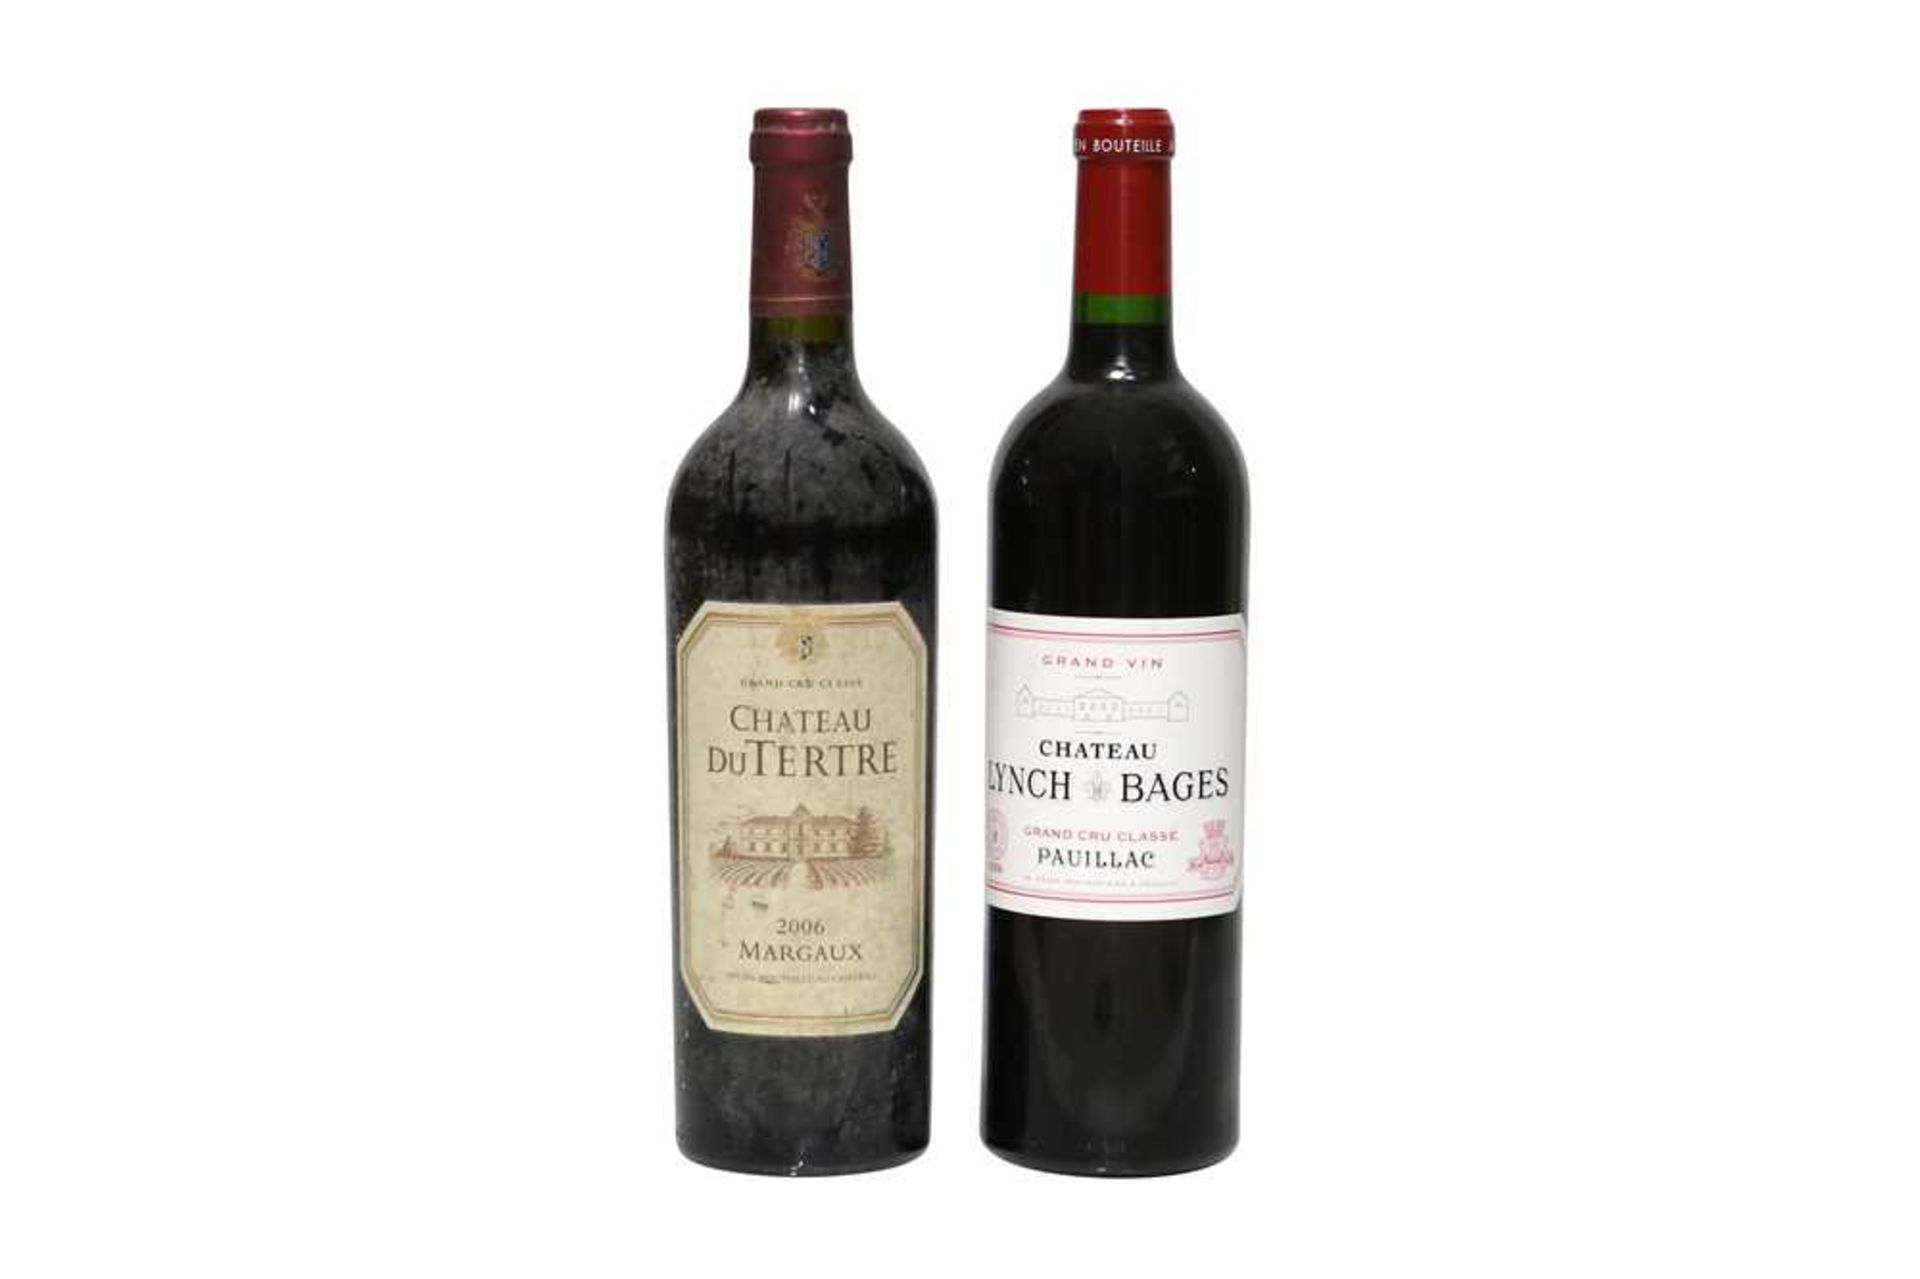 Chateau Lynch Bages, 2006 and Chateau du Terte, 2006, two bottles in total